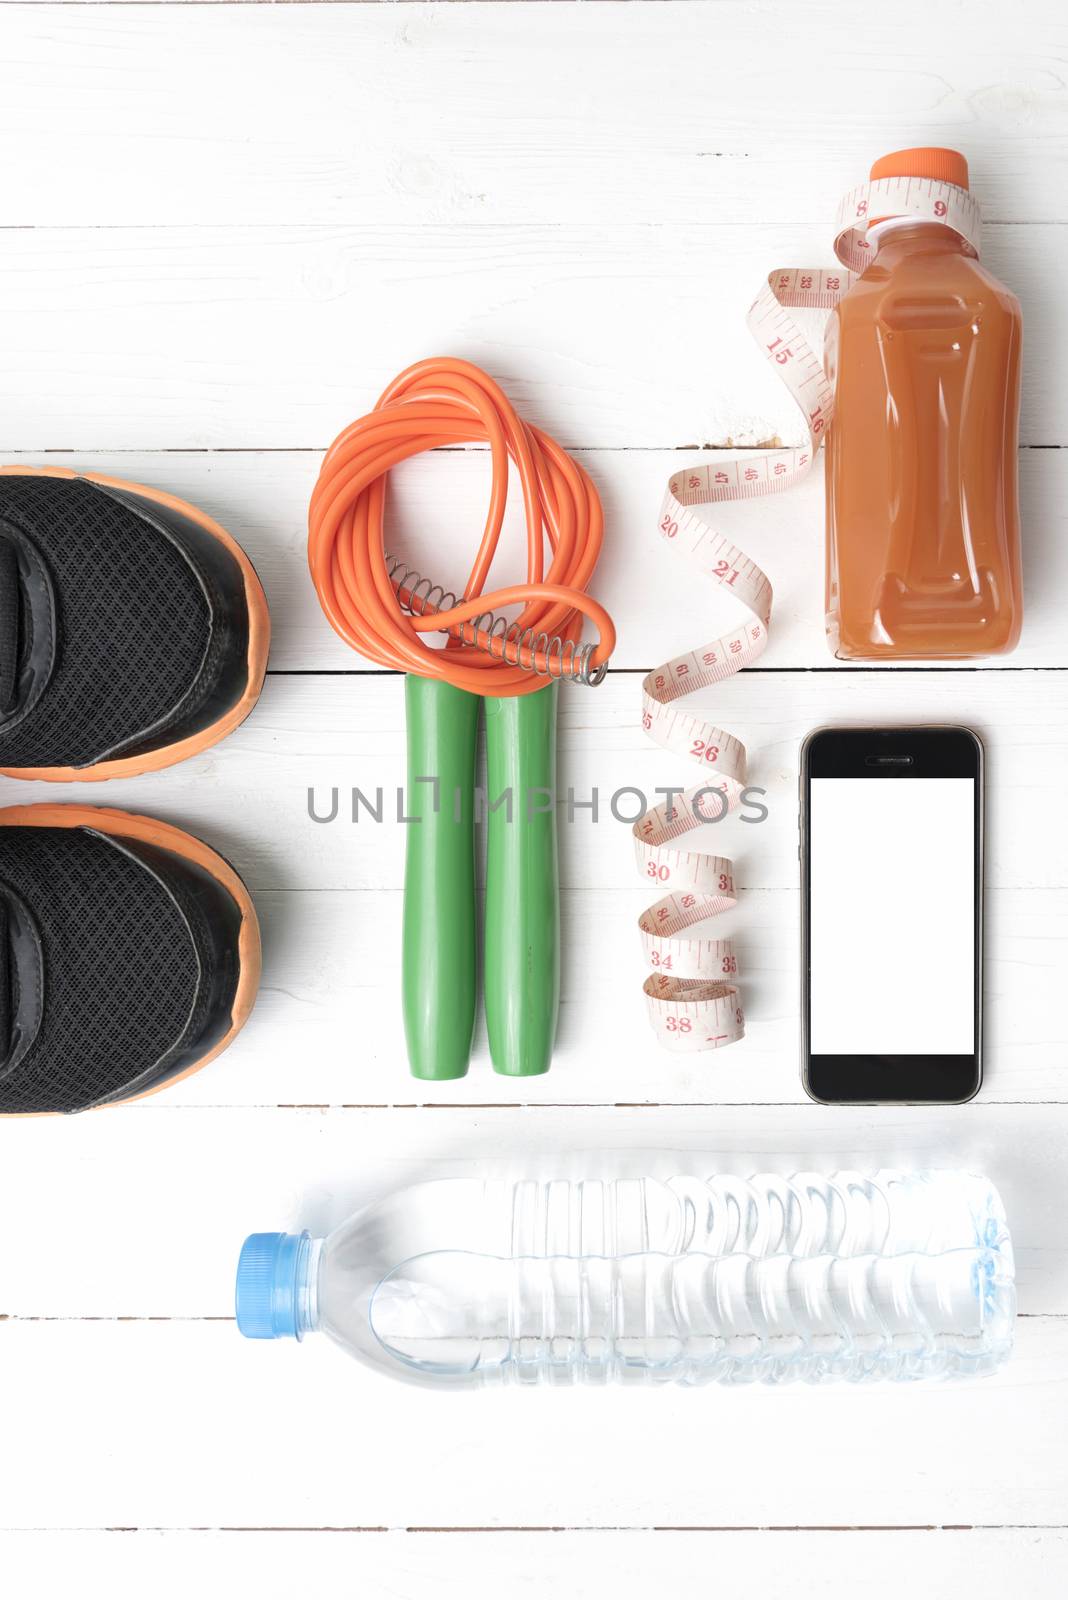 fitness equipment:running shoes,phone,measuring tape,water,juice and jumpong rope on white wood background